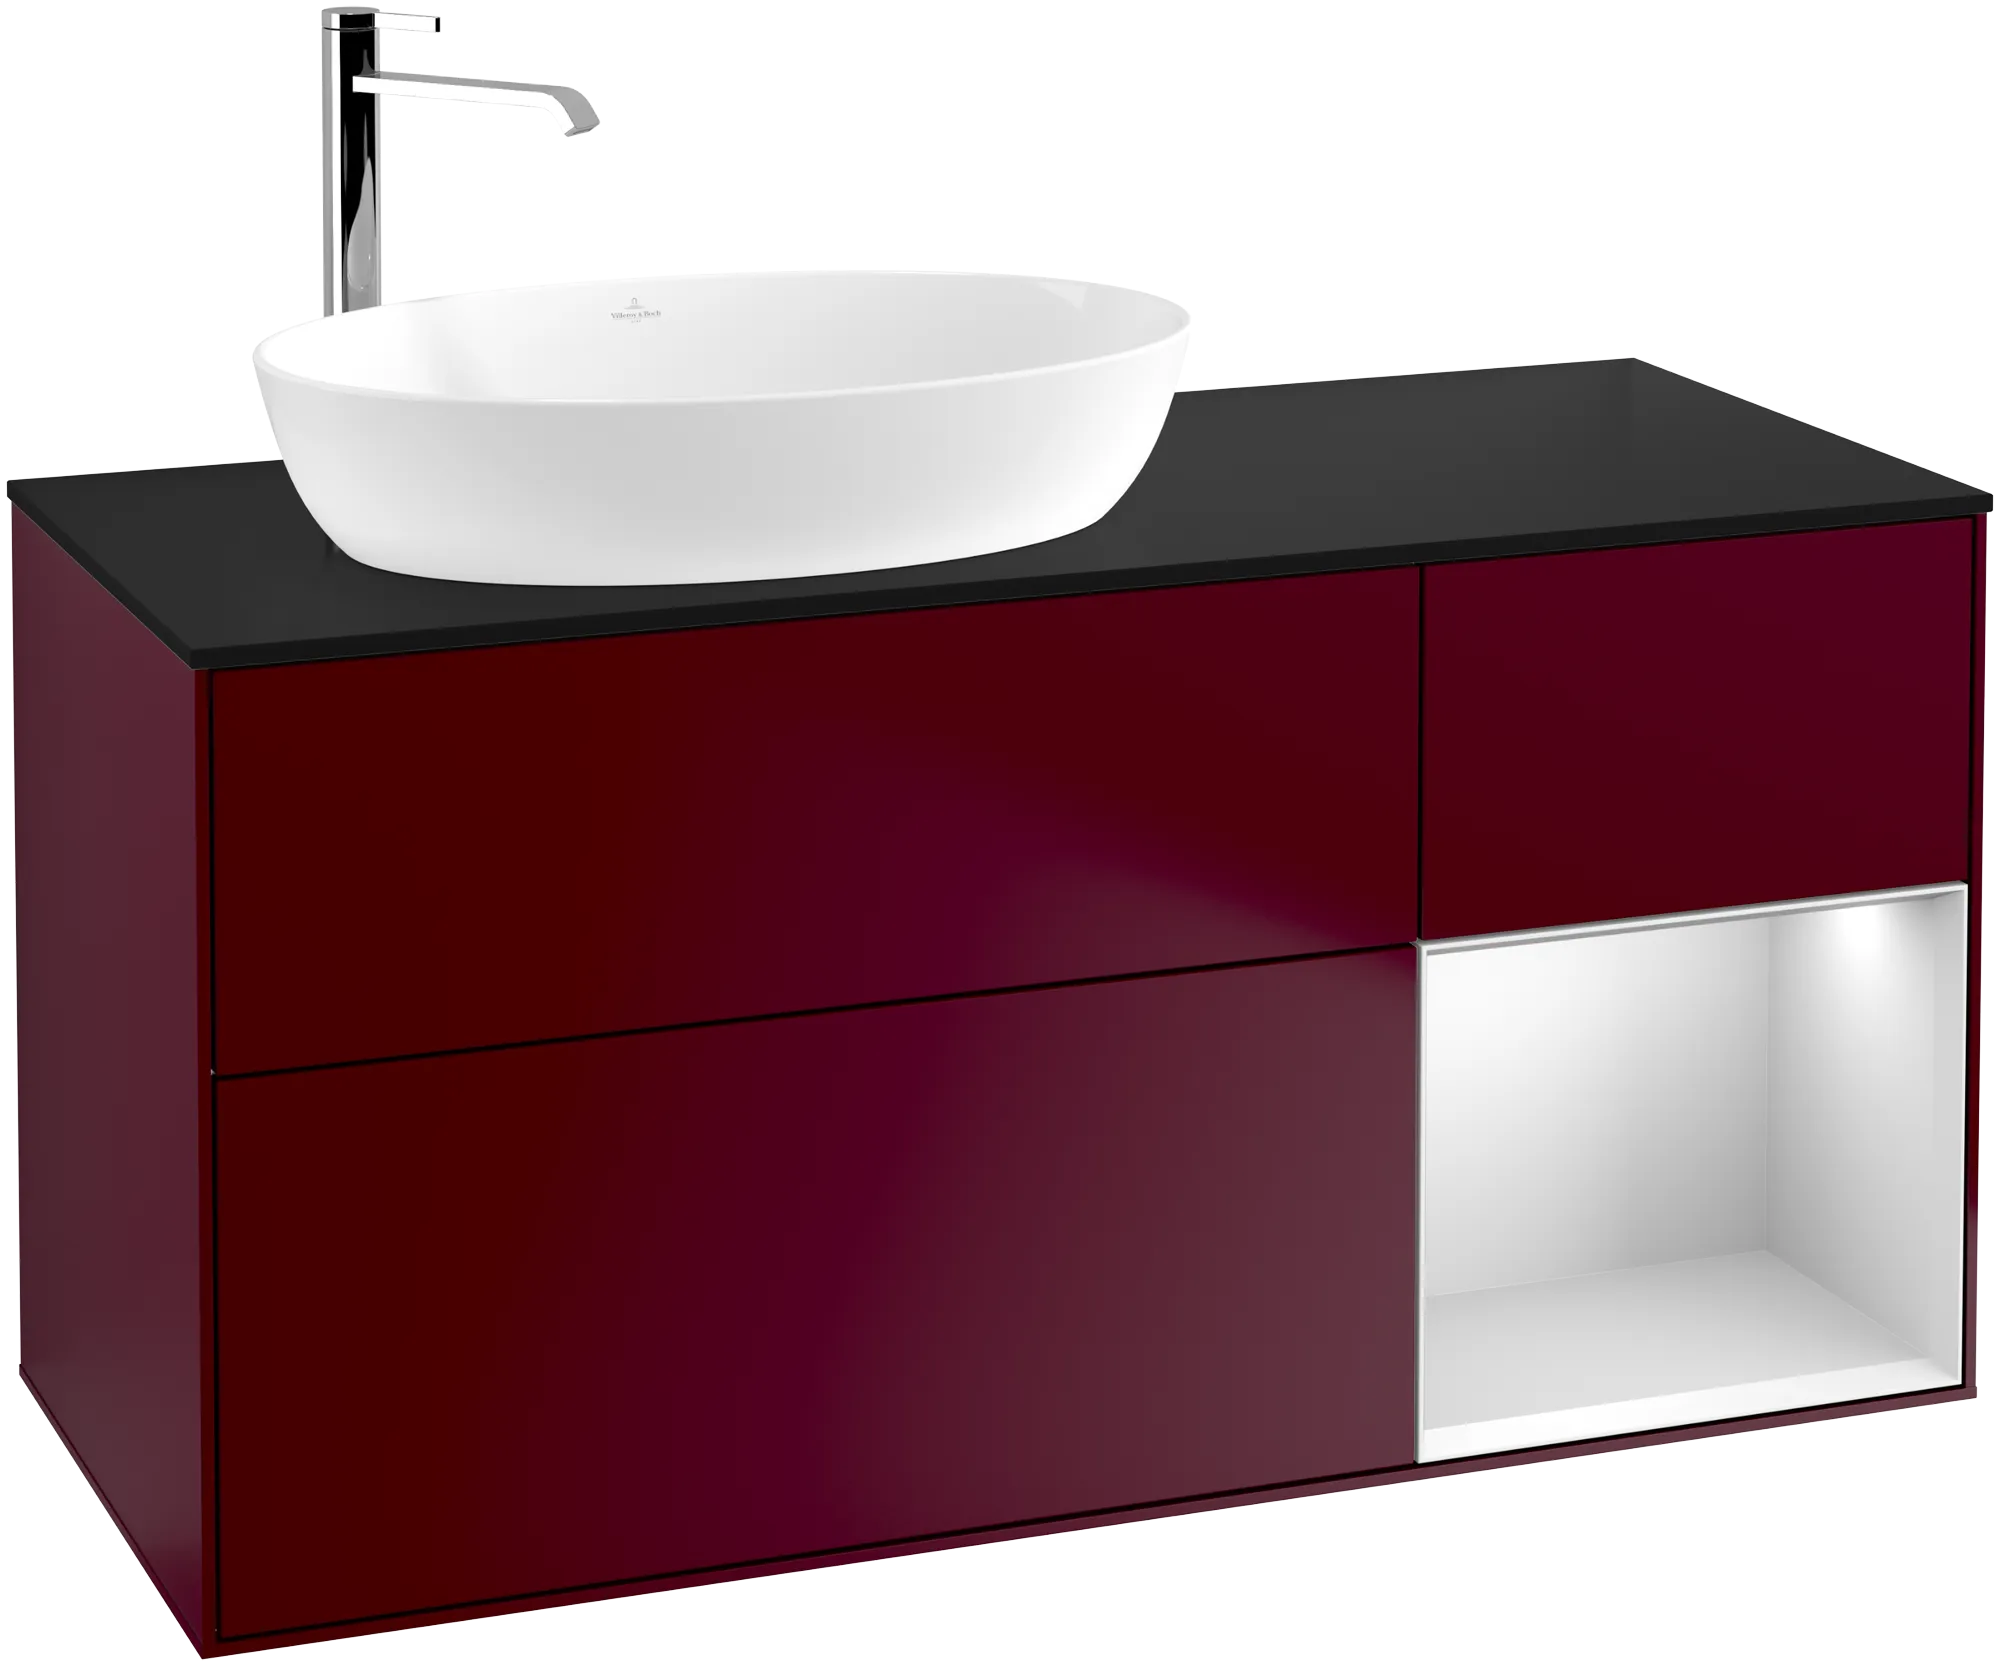 Picture of VILLEROY BOCH Finion Vanity unit, with lighting, 3 pull-out compartments, 1200 x 603 x 501 mm, Peony Matt Lacquer / White Matt Lacquer / Glass Black Matt #G932MTHB